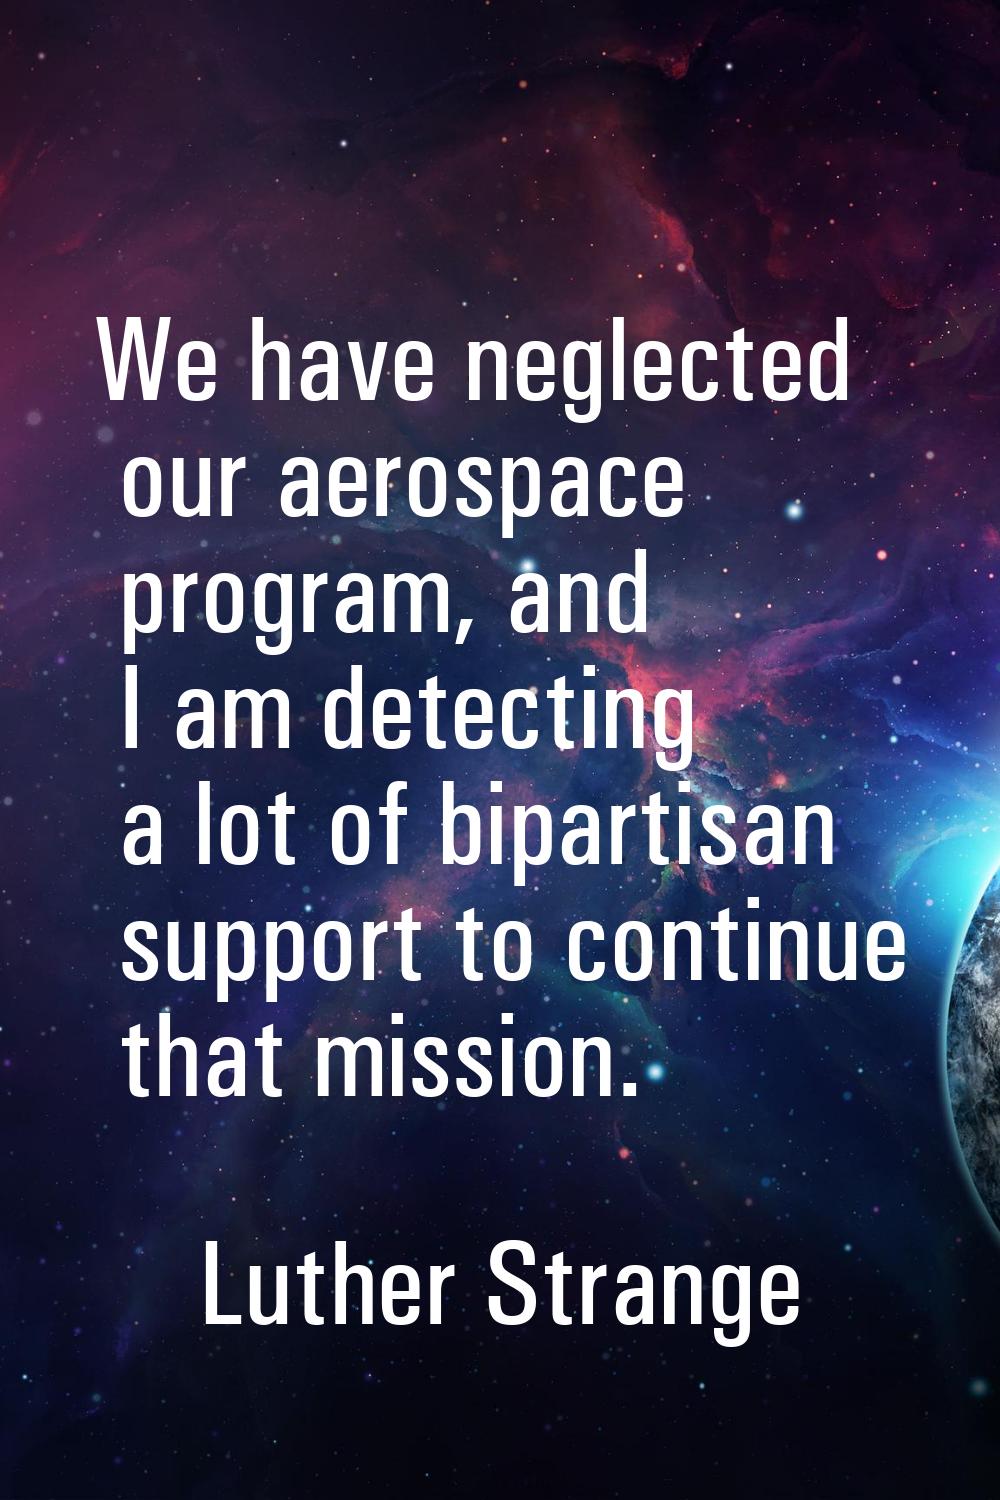 We have neglected our aerospace program, and I am detecting a lot of bipartisan support to continue